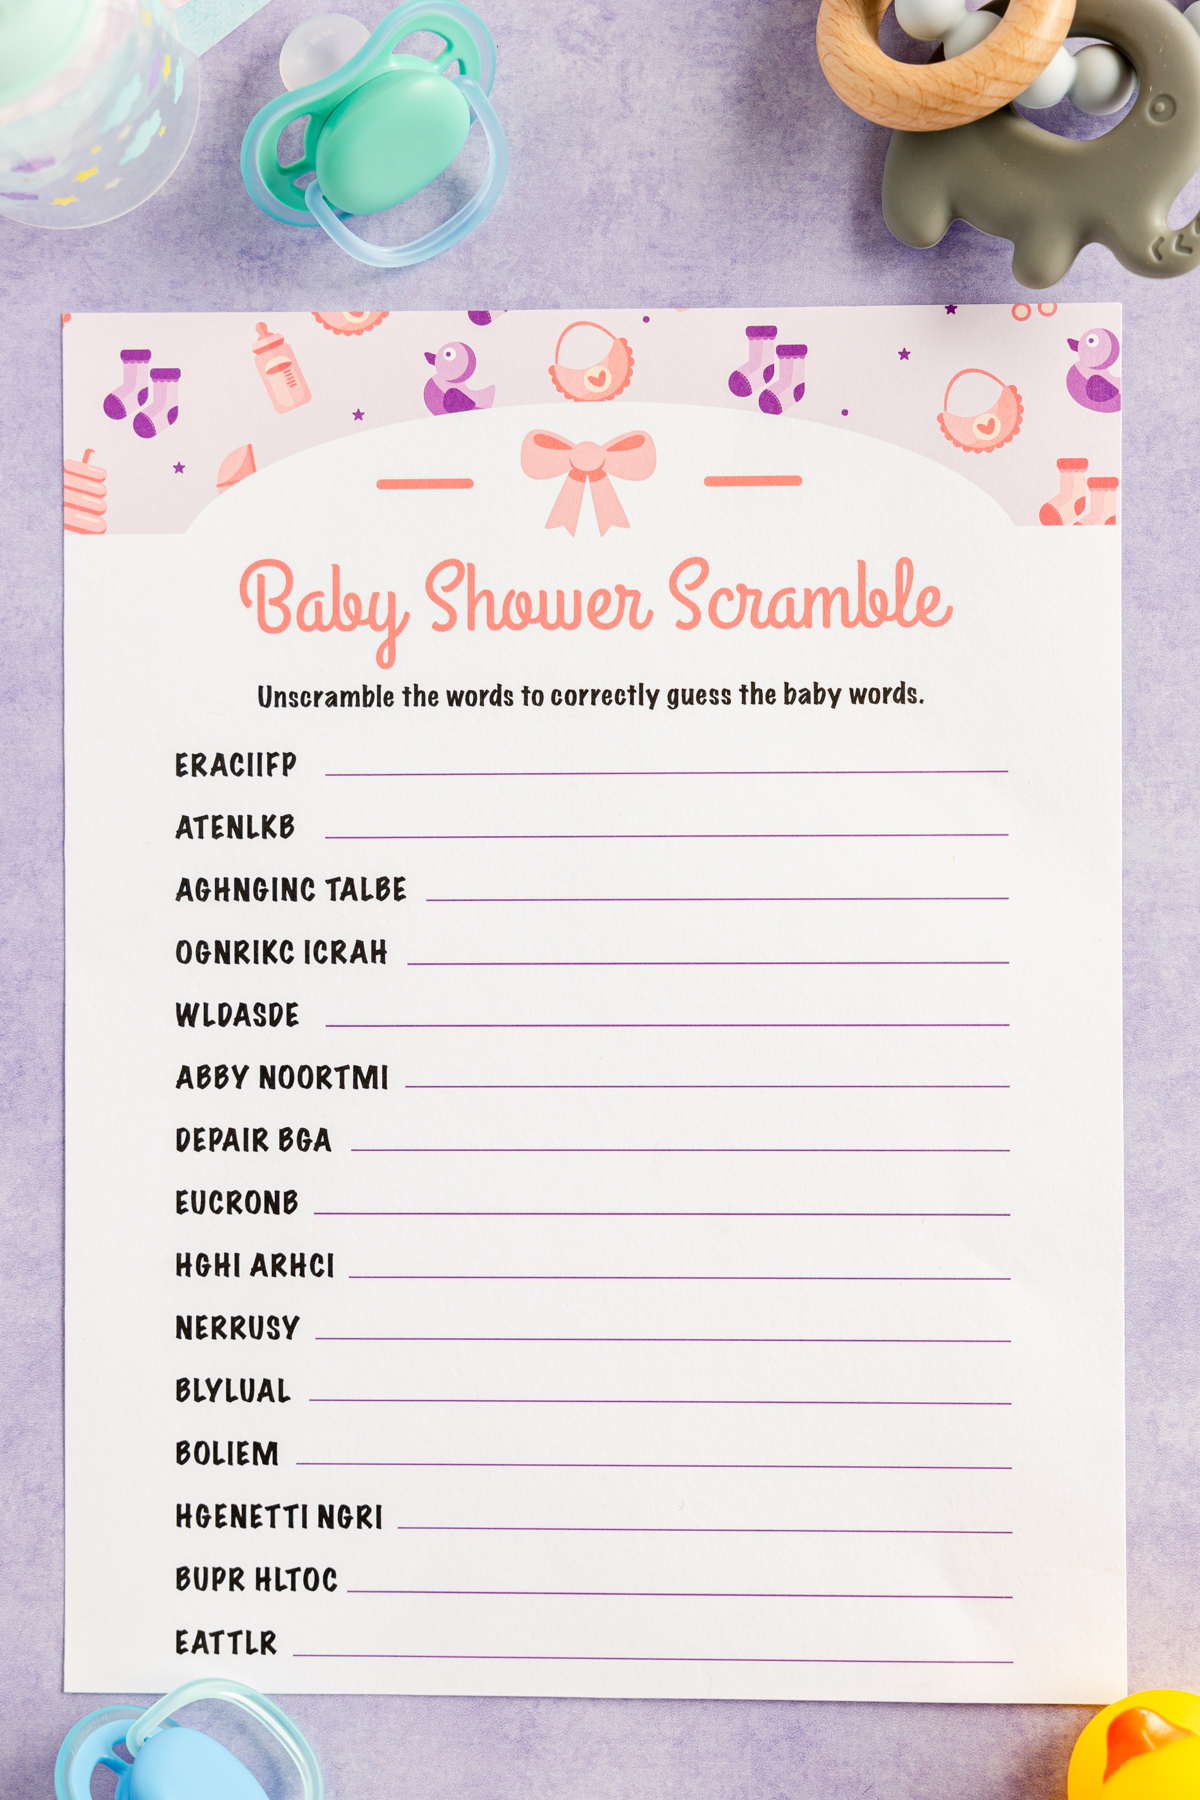 printed out blank baby shower word scramble game